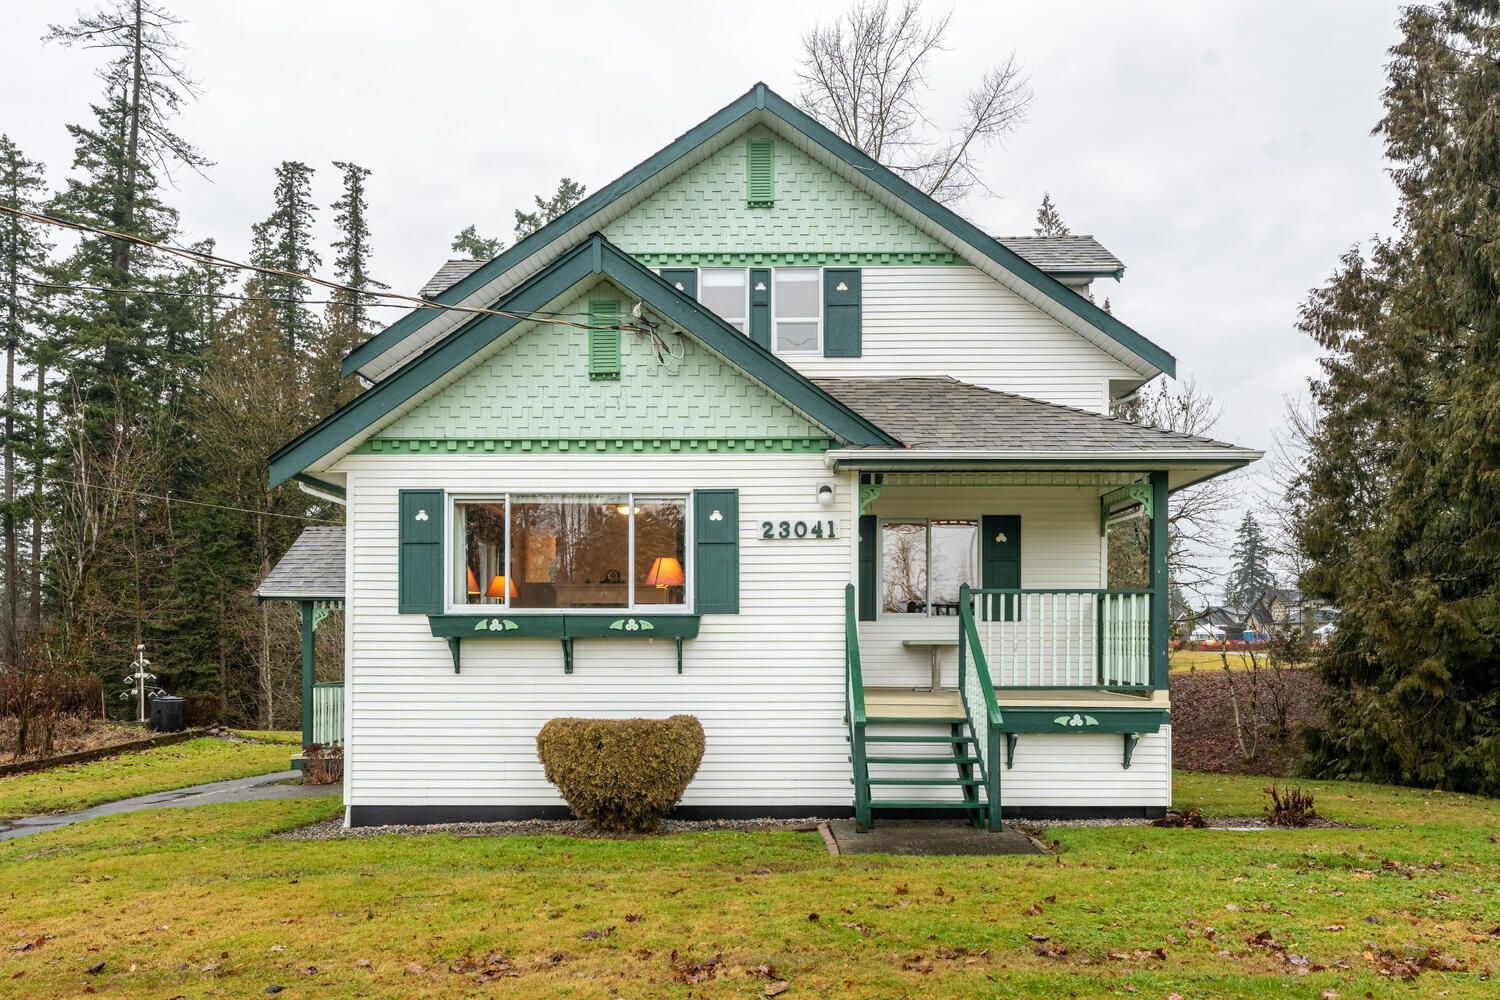 I have sold a property at 23041 80 AVE in Langley
